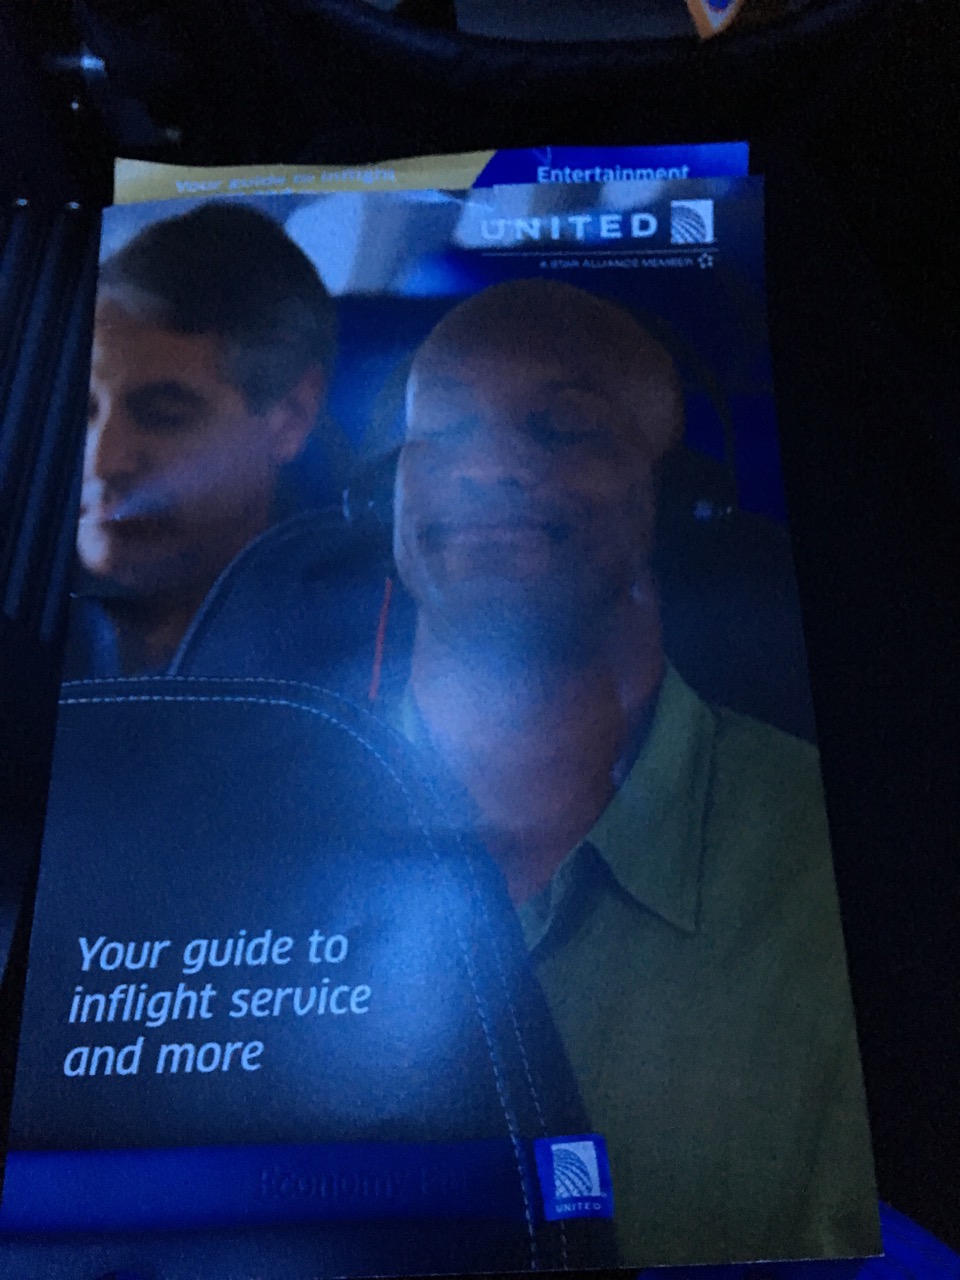 United Inflight Service Guide